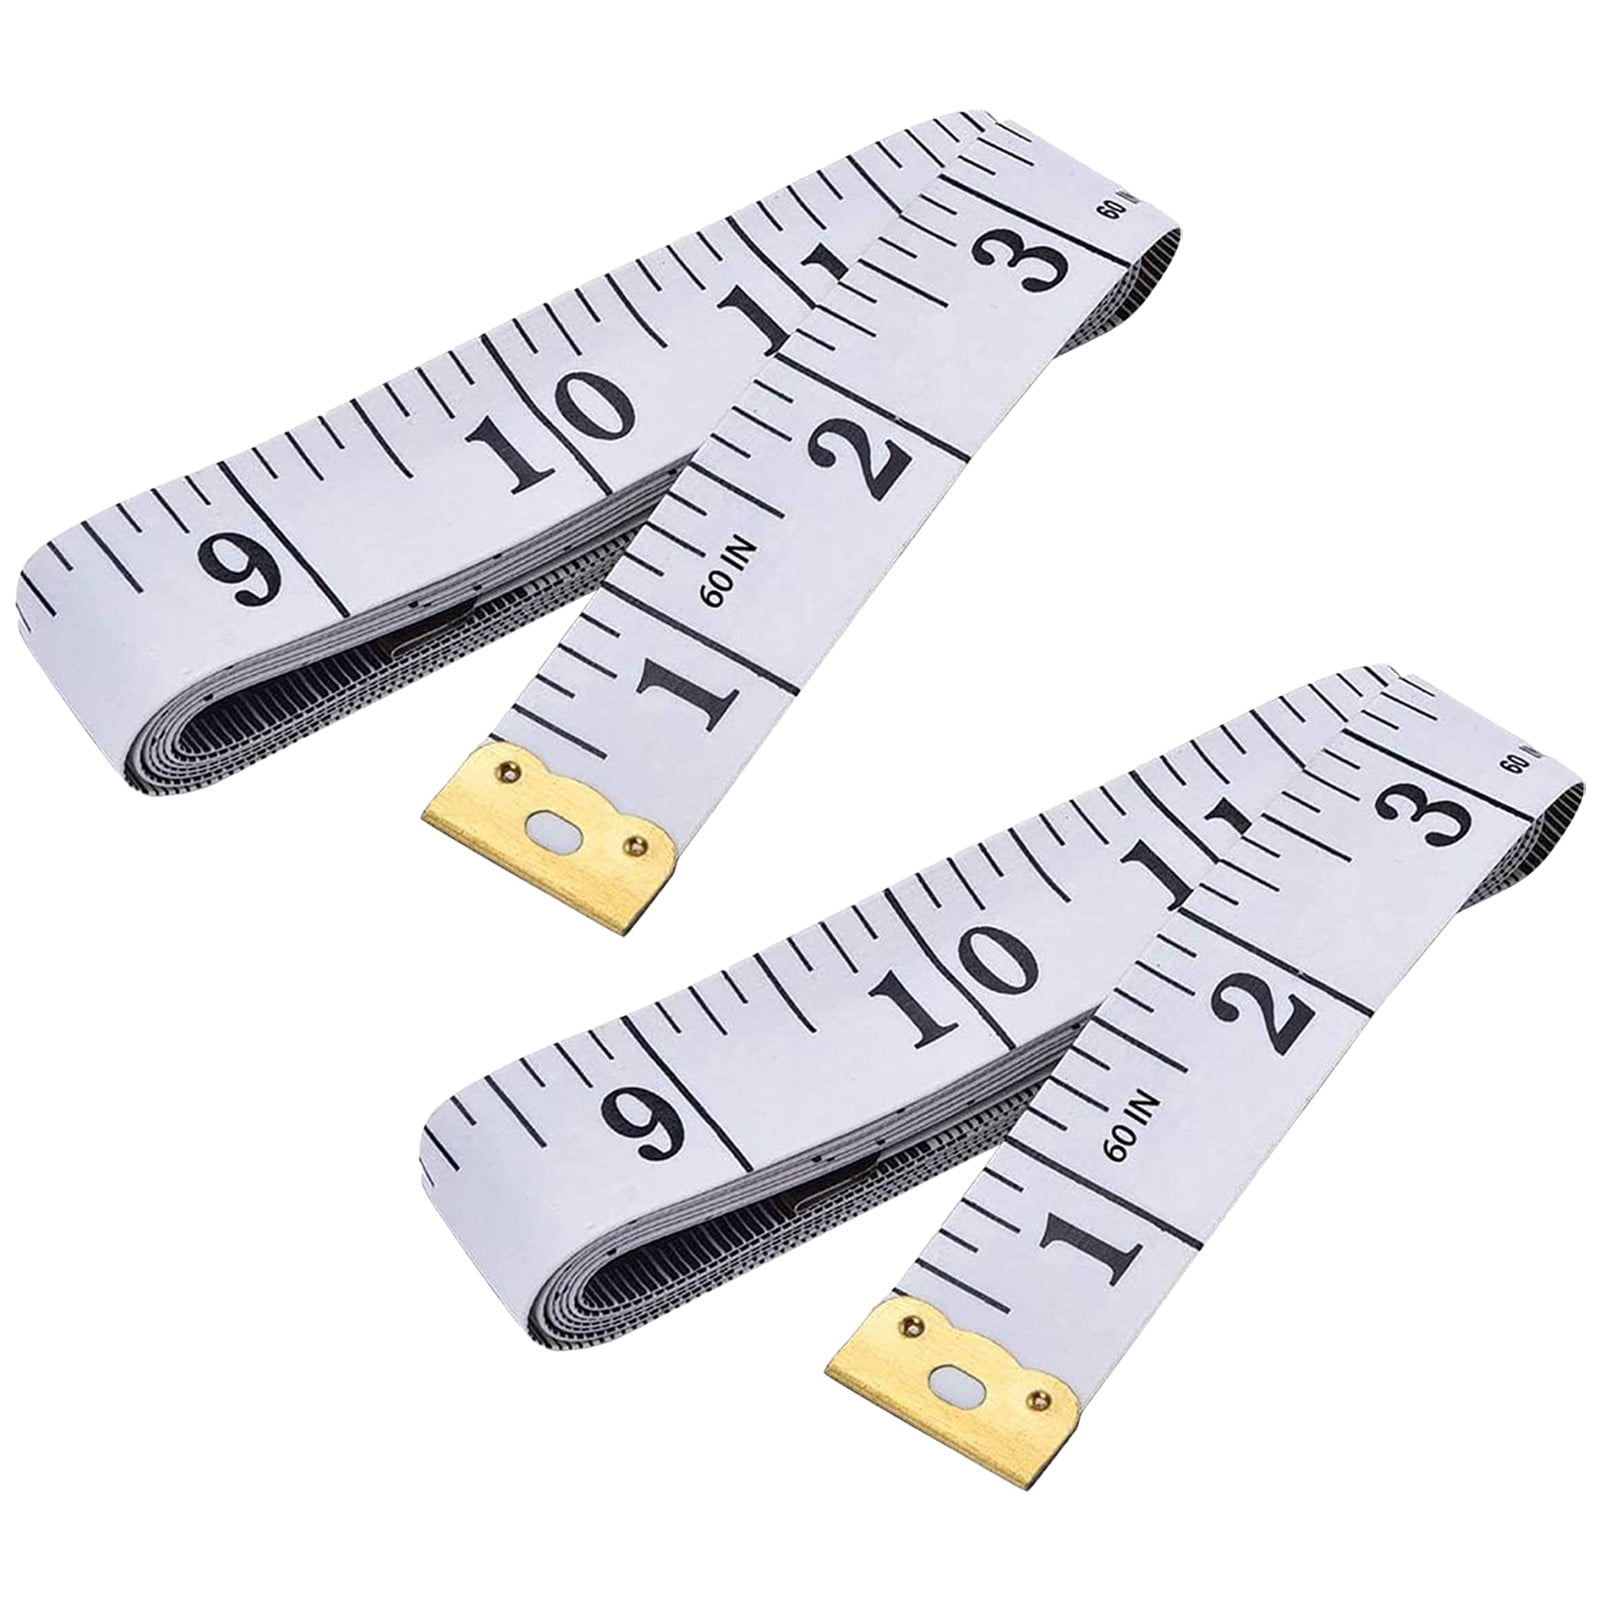 3x Body Measuring Ruler Sewing Cloth Tailor Tape Measure Tapeline Soft 60in 1.5M